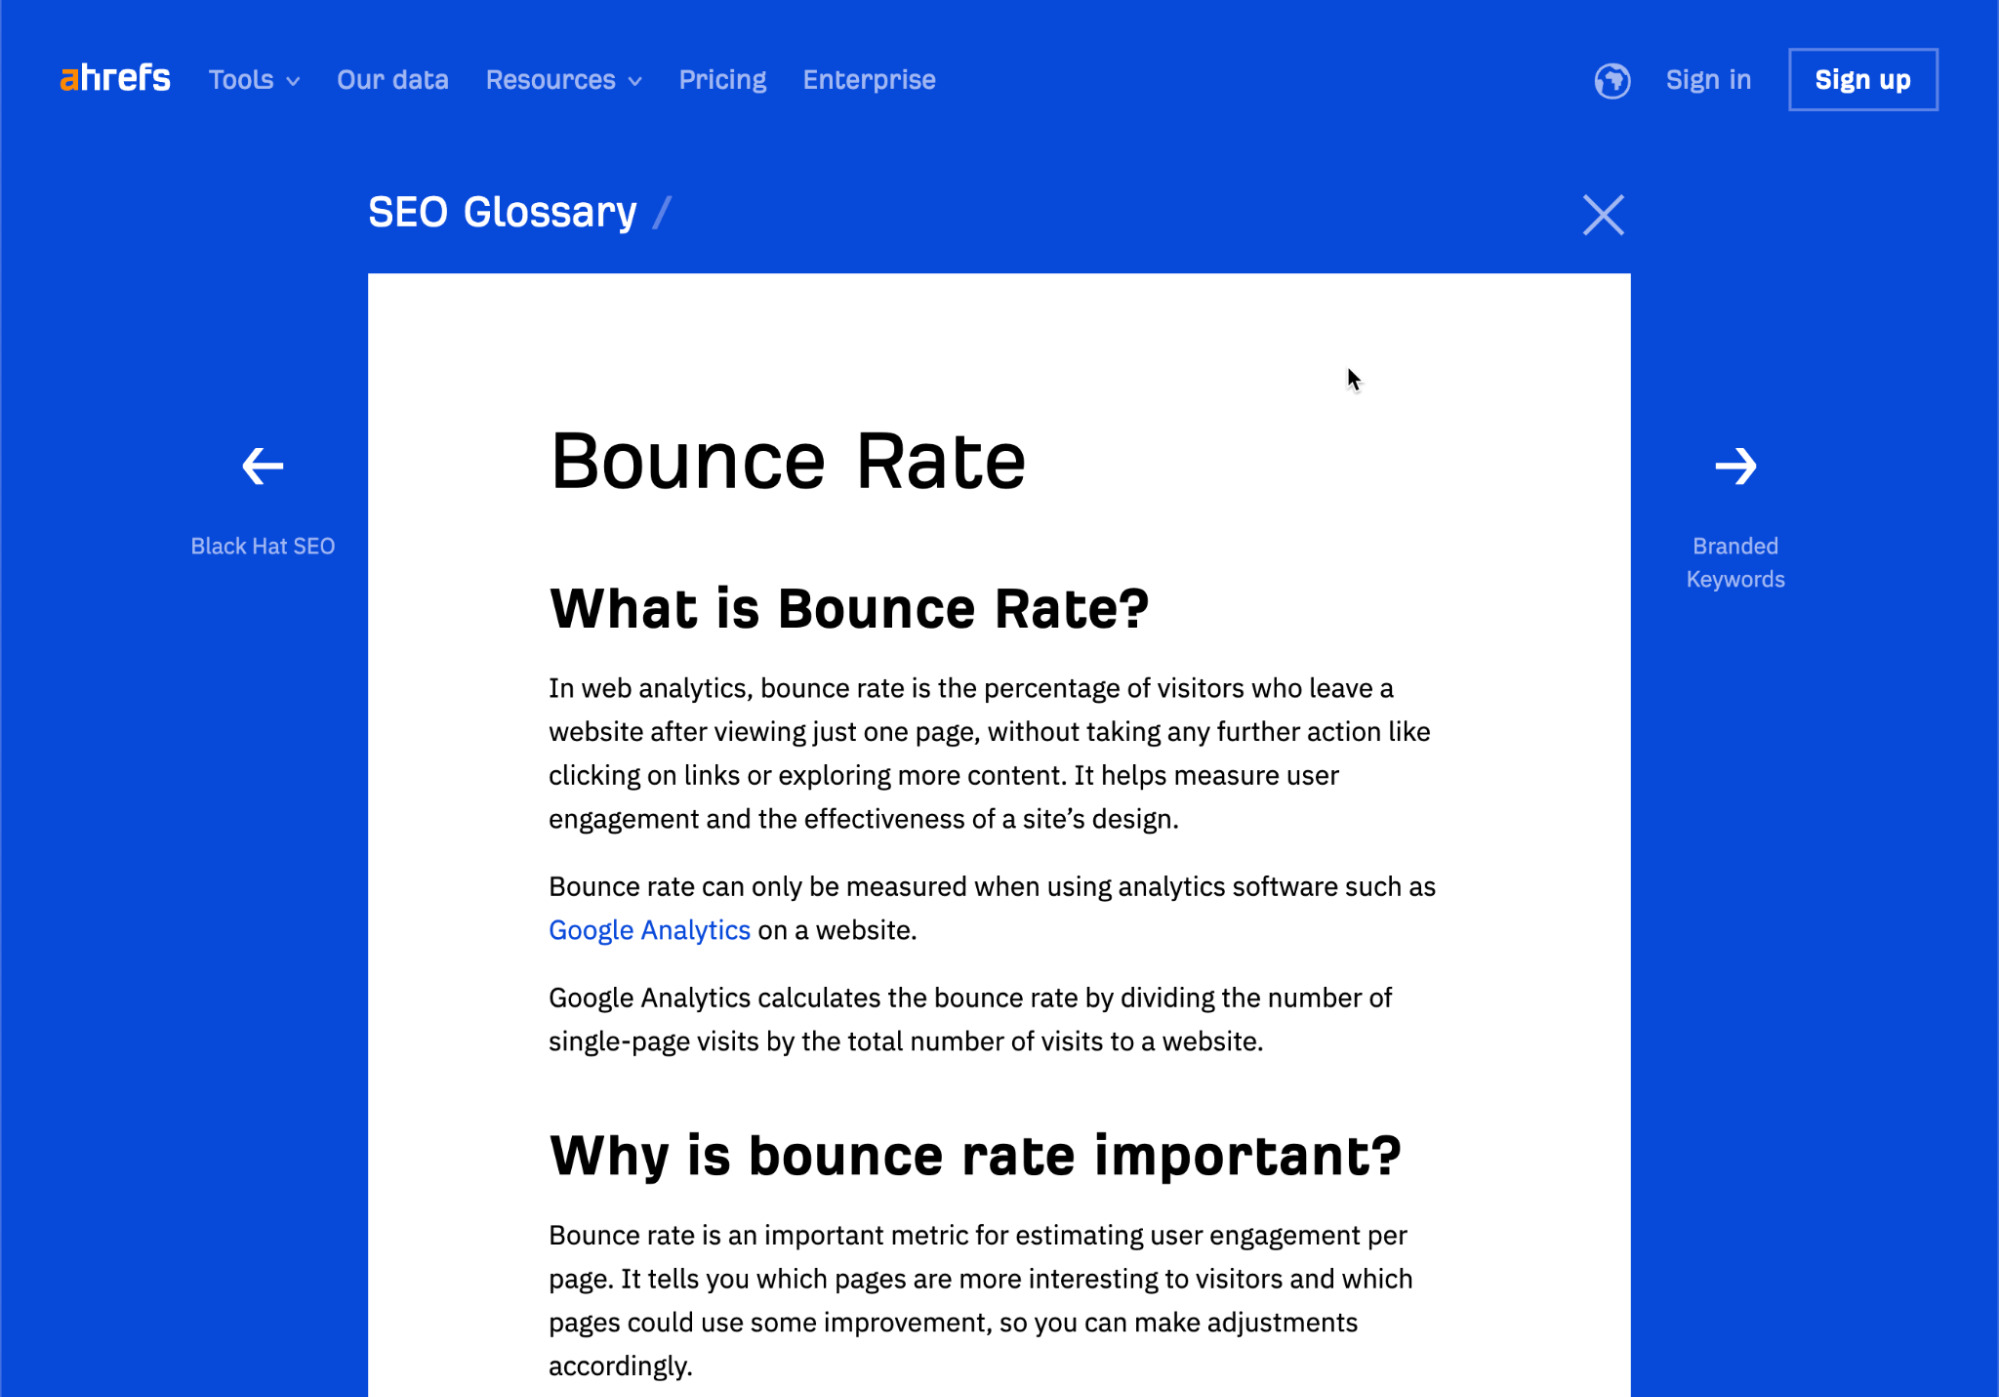 Our glossary post about bounce rate
